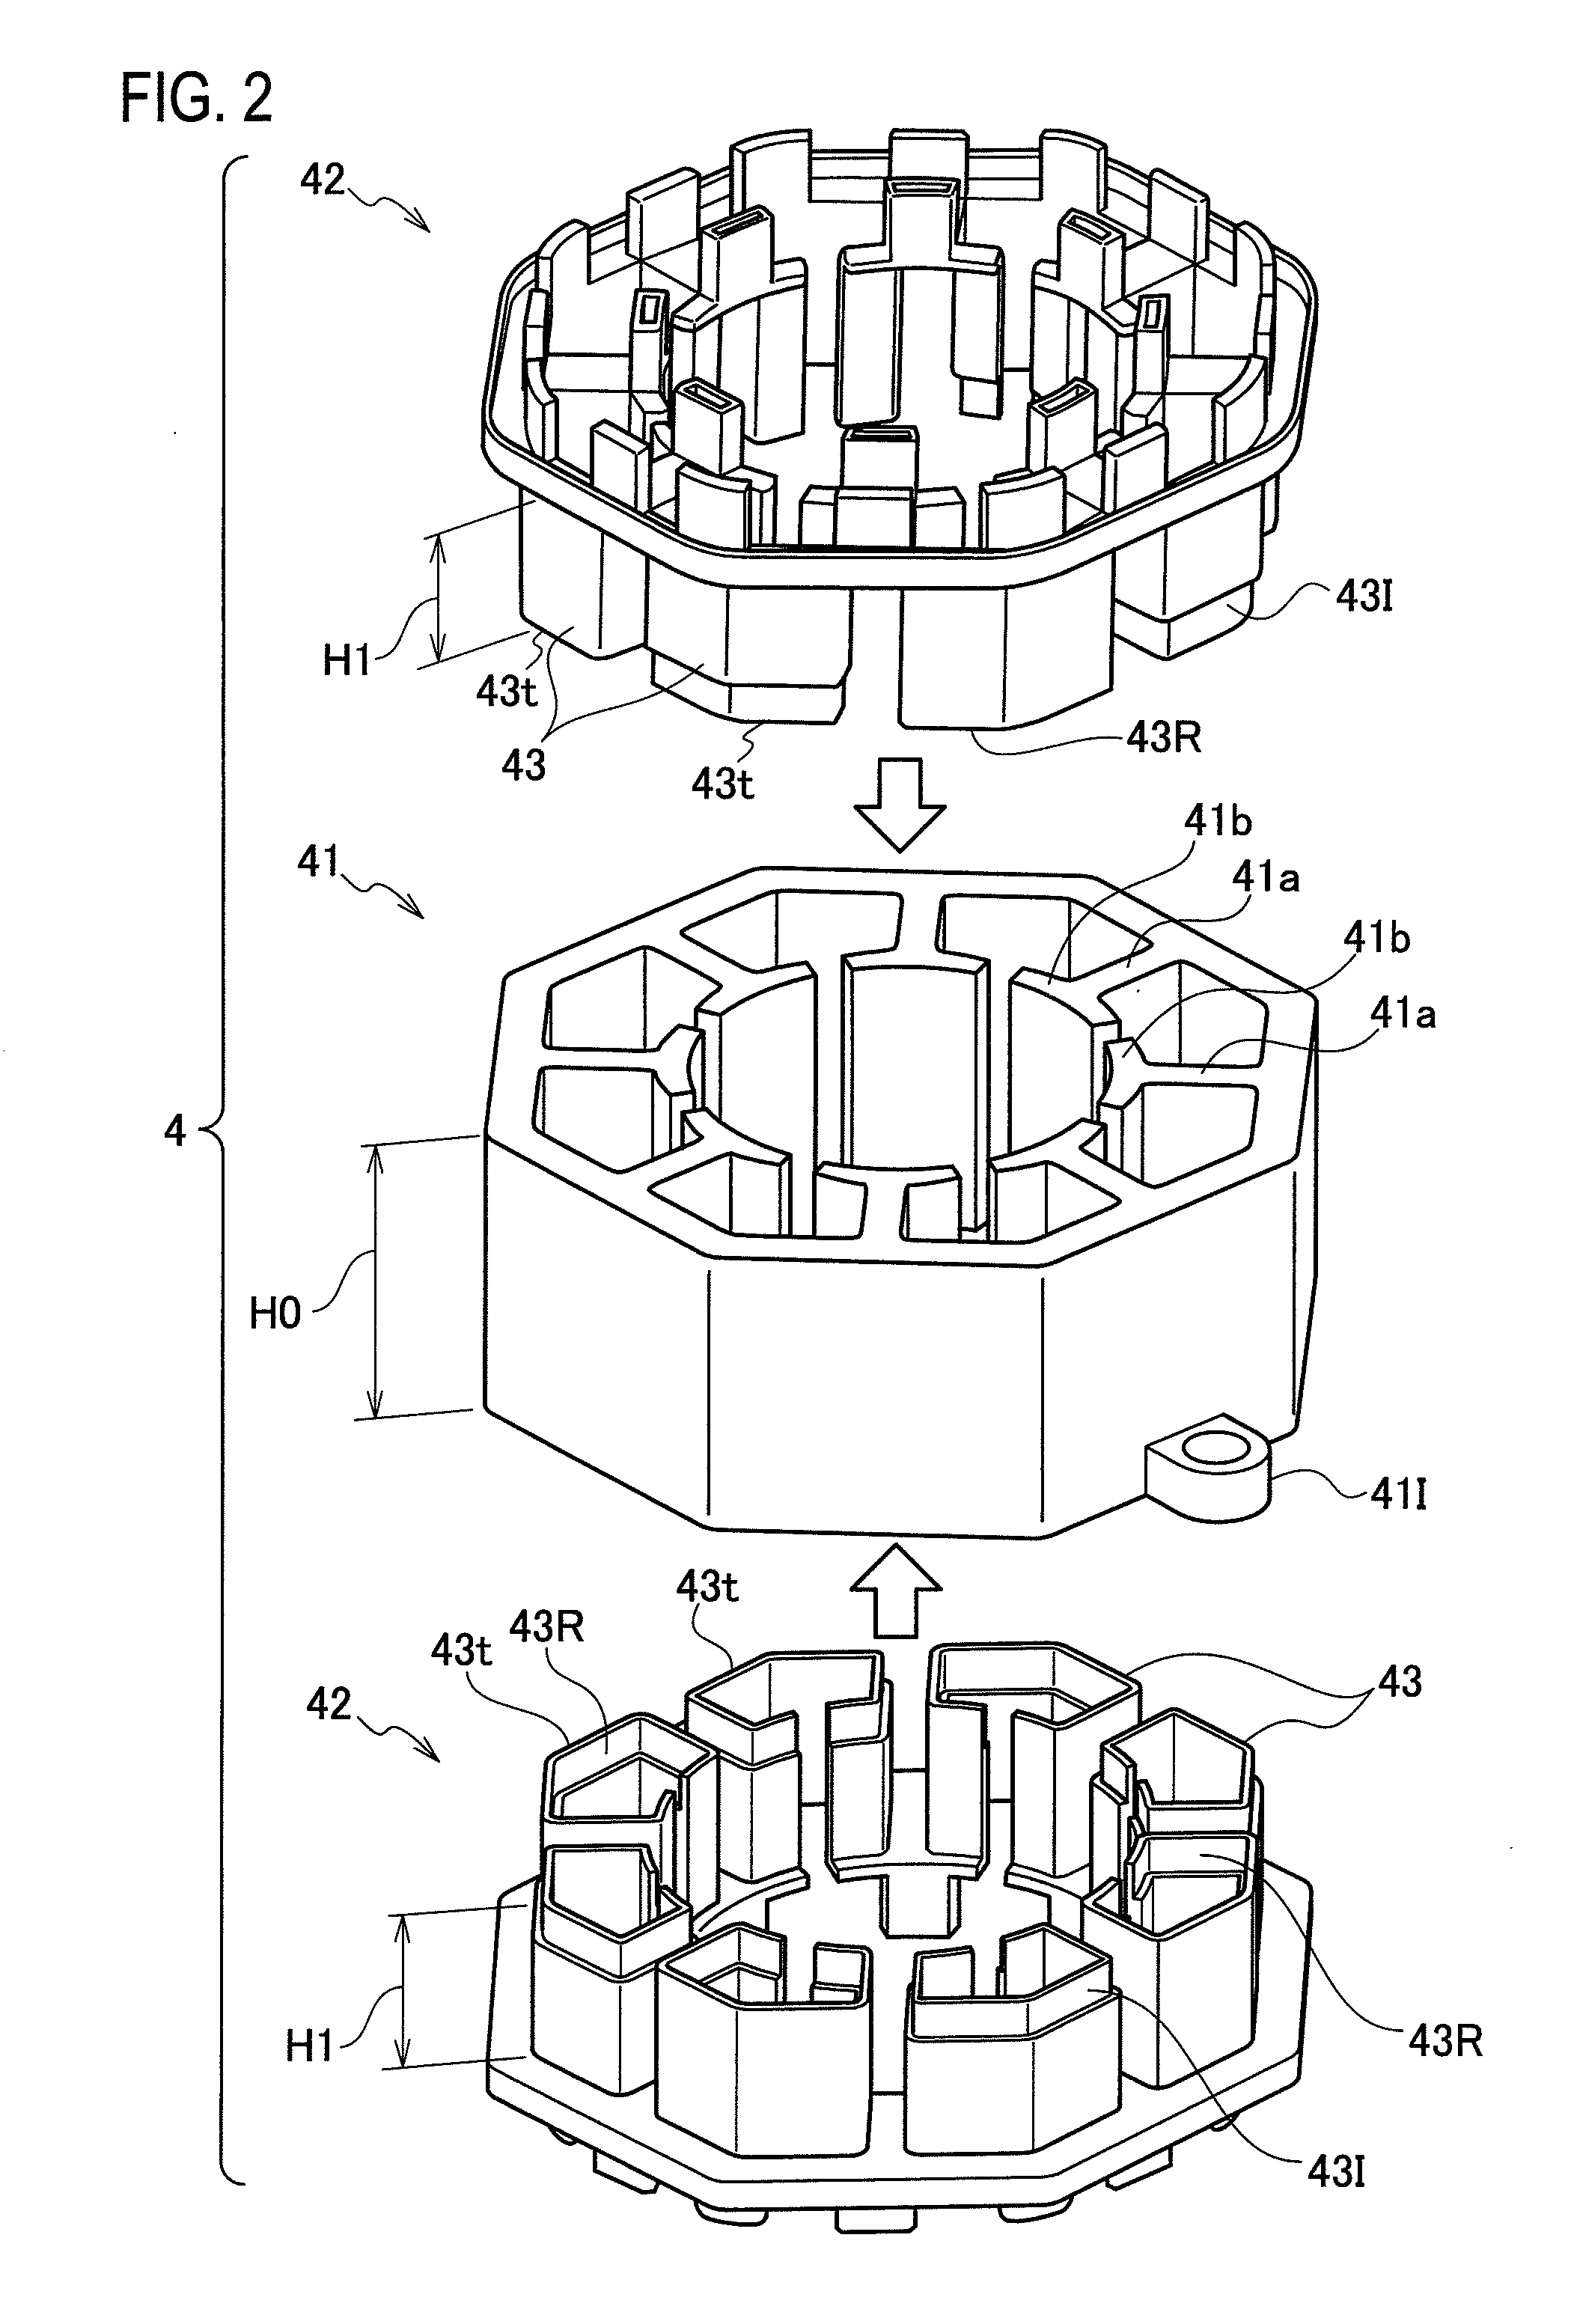 Insulator structure of motor, and motor-integrated pump